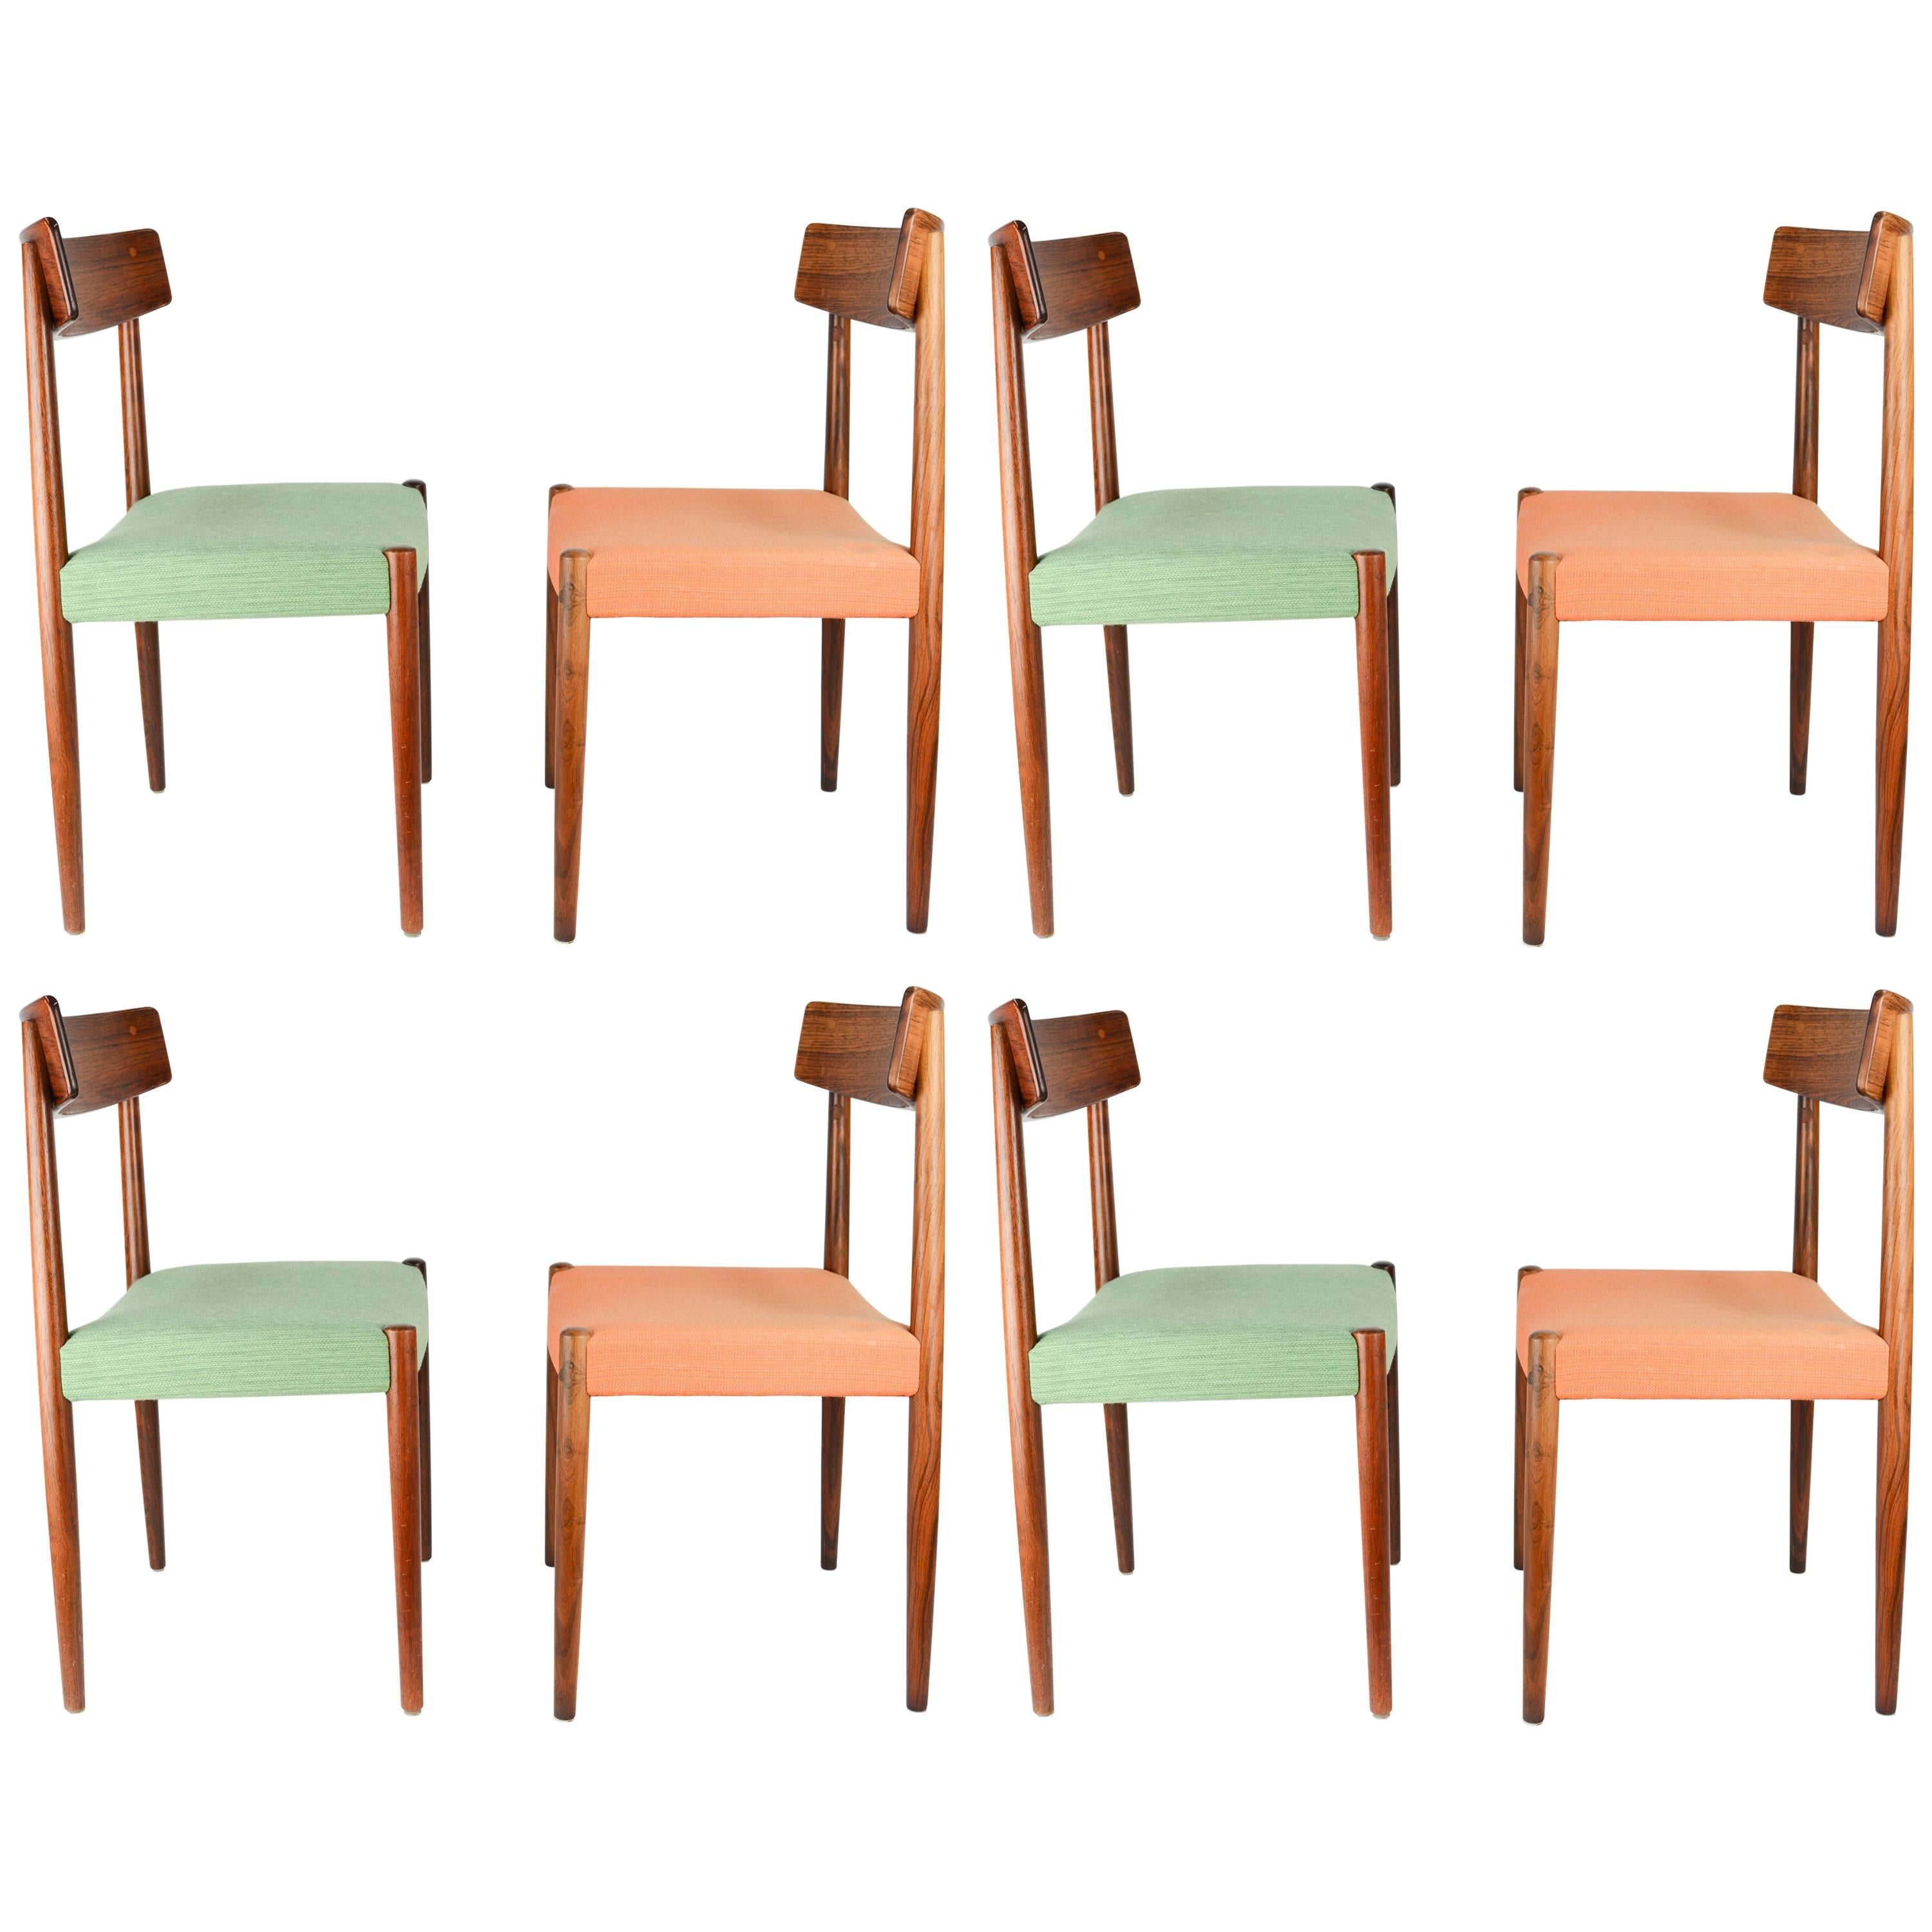 Spectacular Set of Eight Rosewood Chairs by Nils Jonsson for Troeds of Sweden